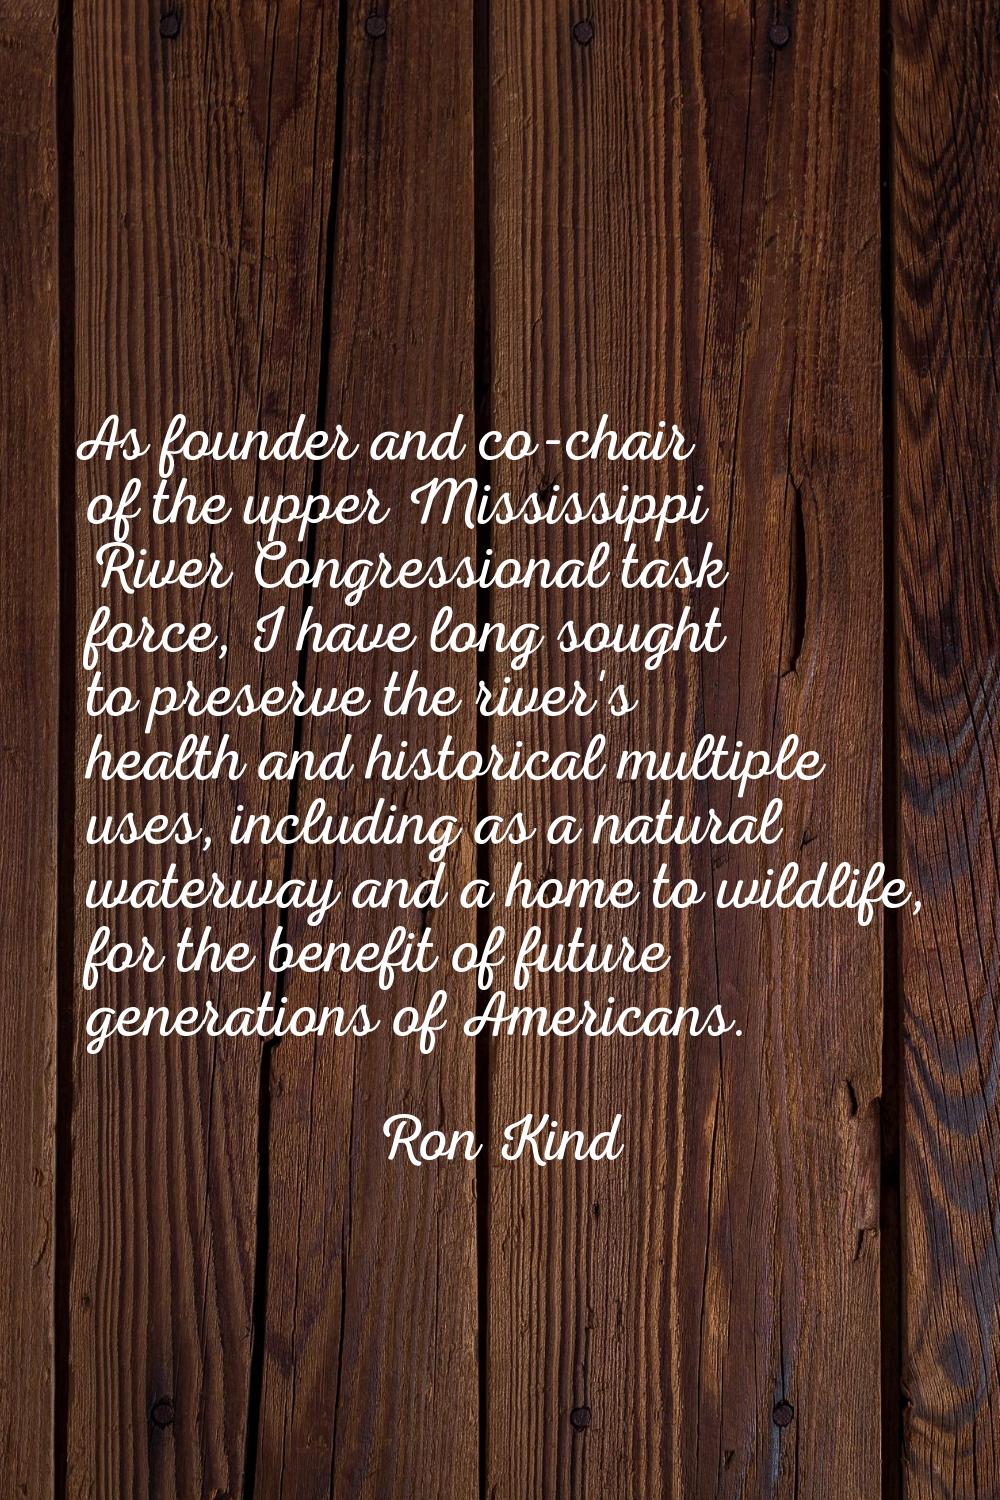 As founder and co-chair of the upper Mississippi River Congressional task force, I have long sought